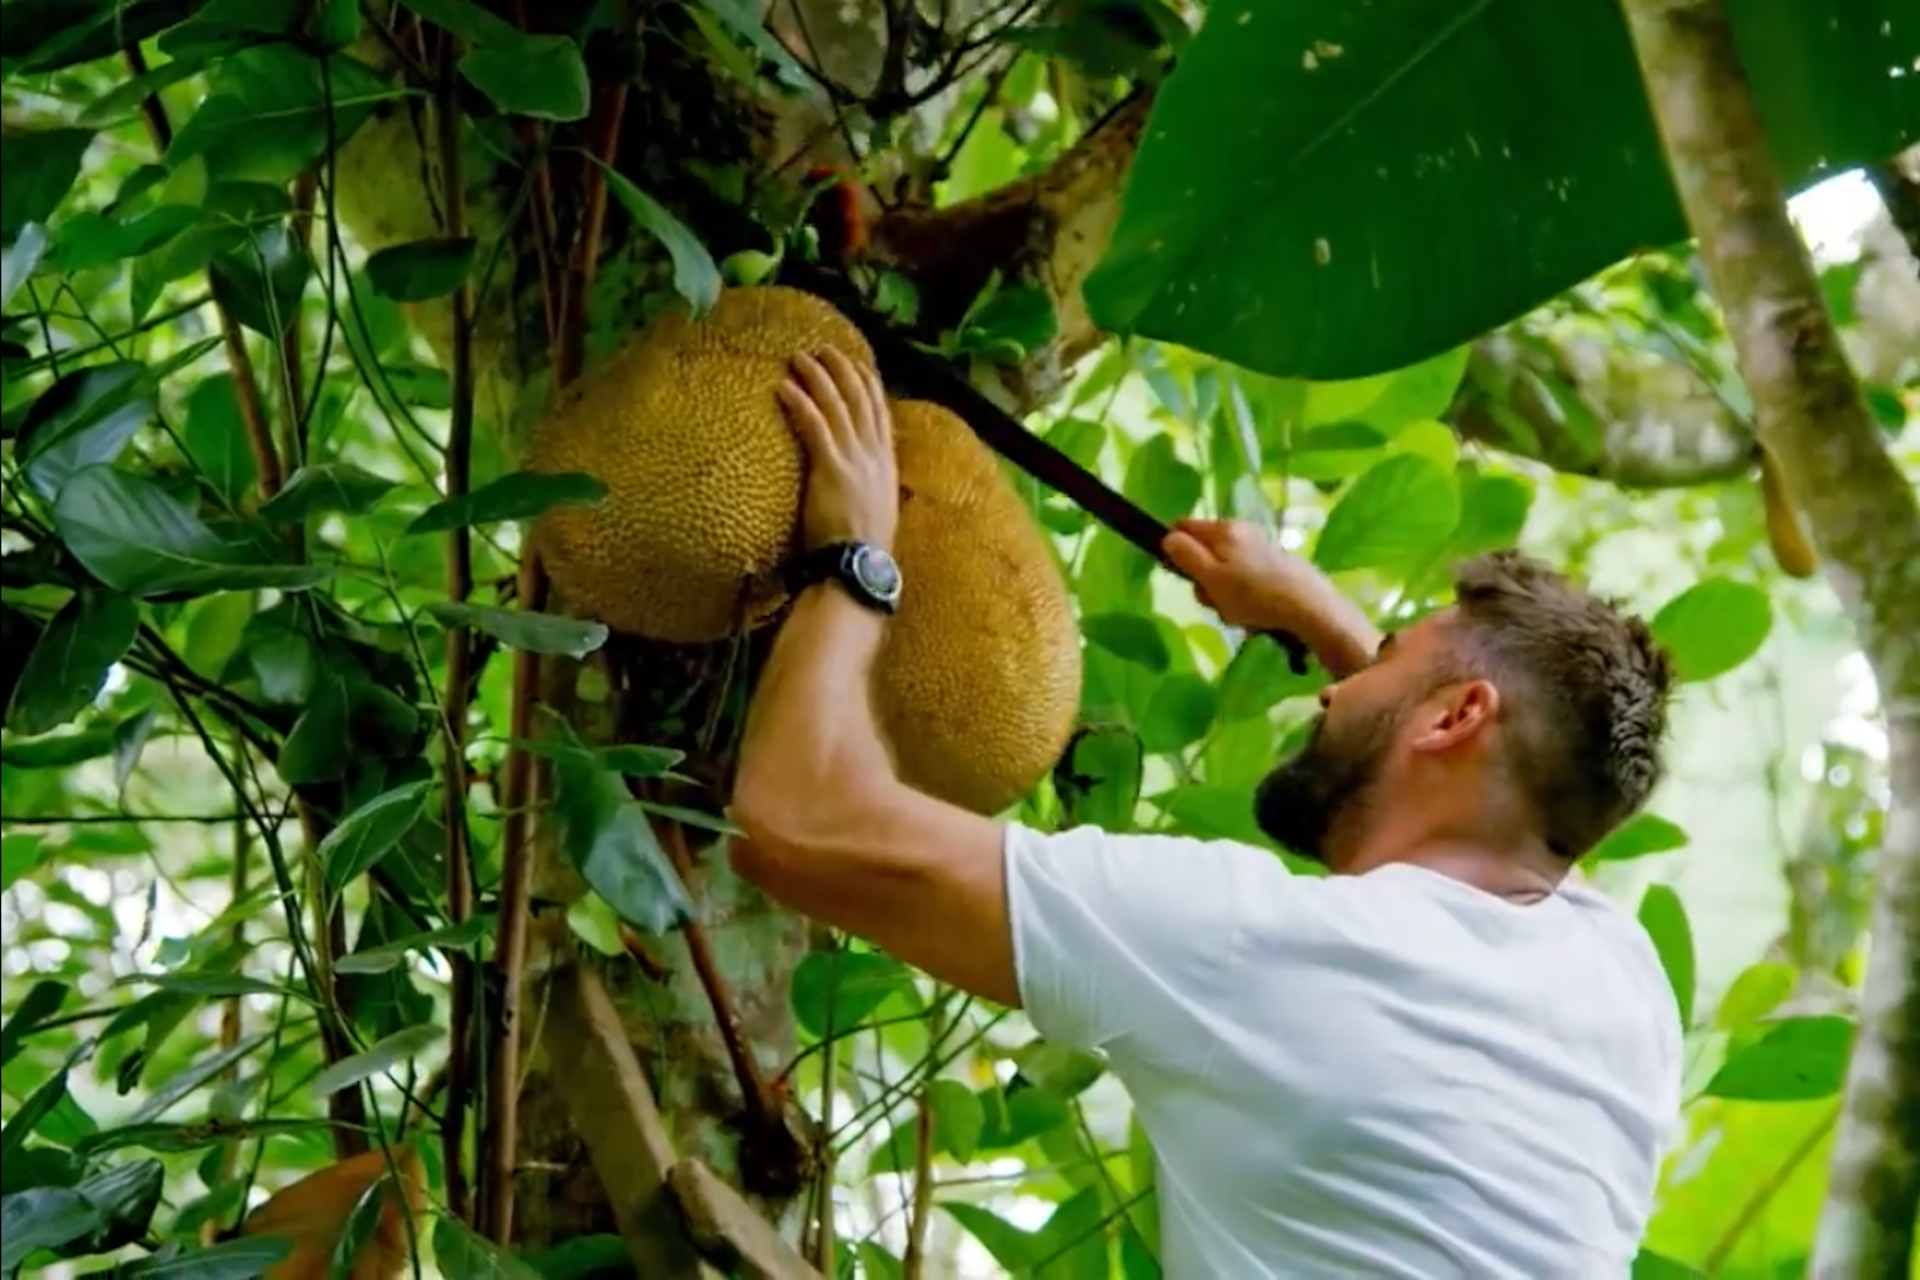 Hollywood actor Zac Efron cutting exotic fruit down from a tree